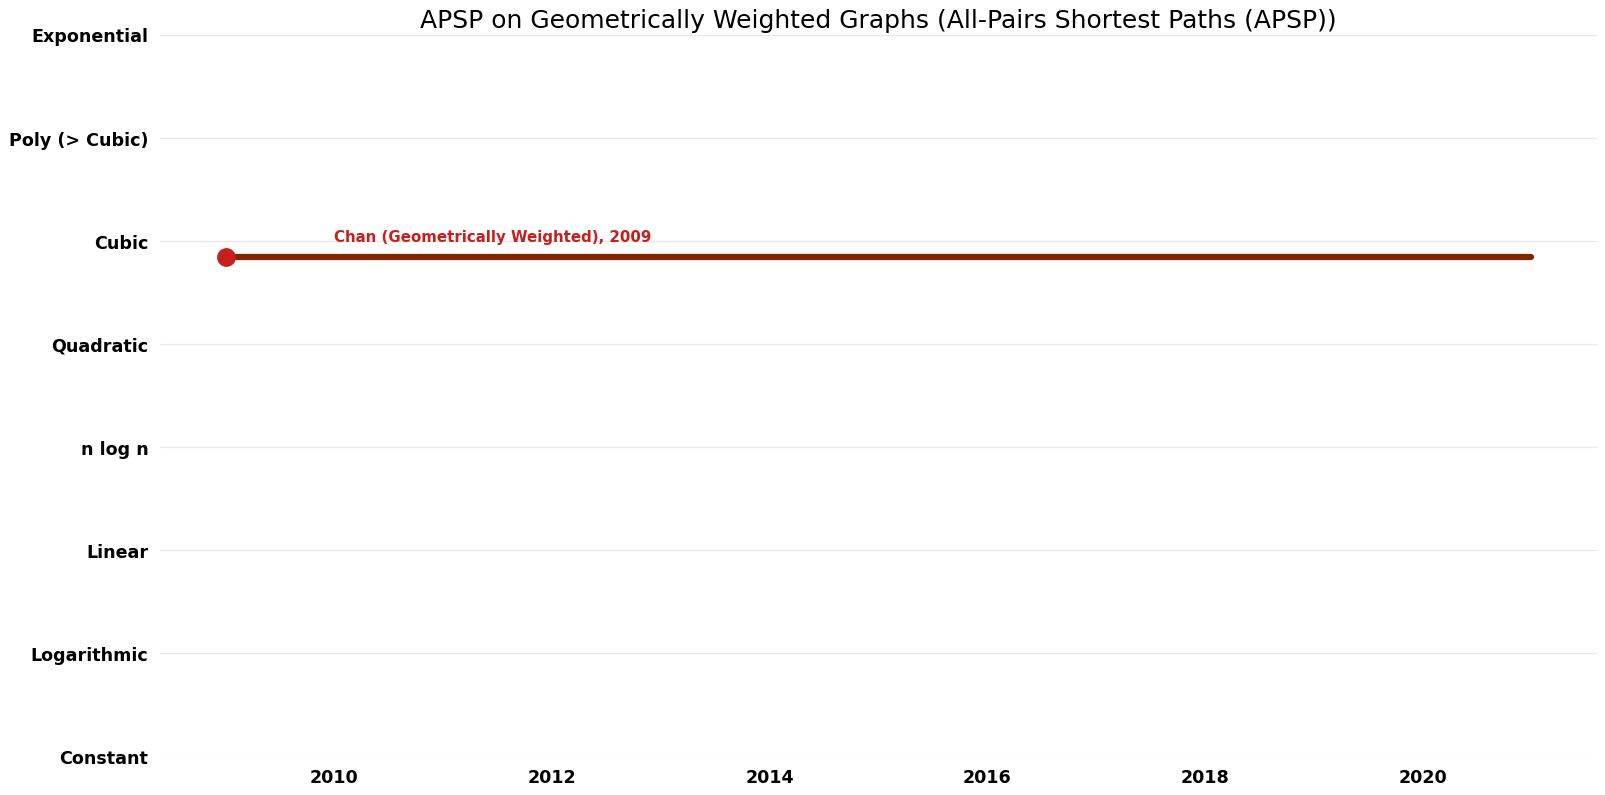 File:All-Pairs Shortest Paths (APSP) - APSP on Geometrically Weighted Graphs - Time.png